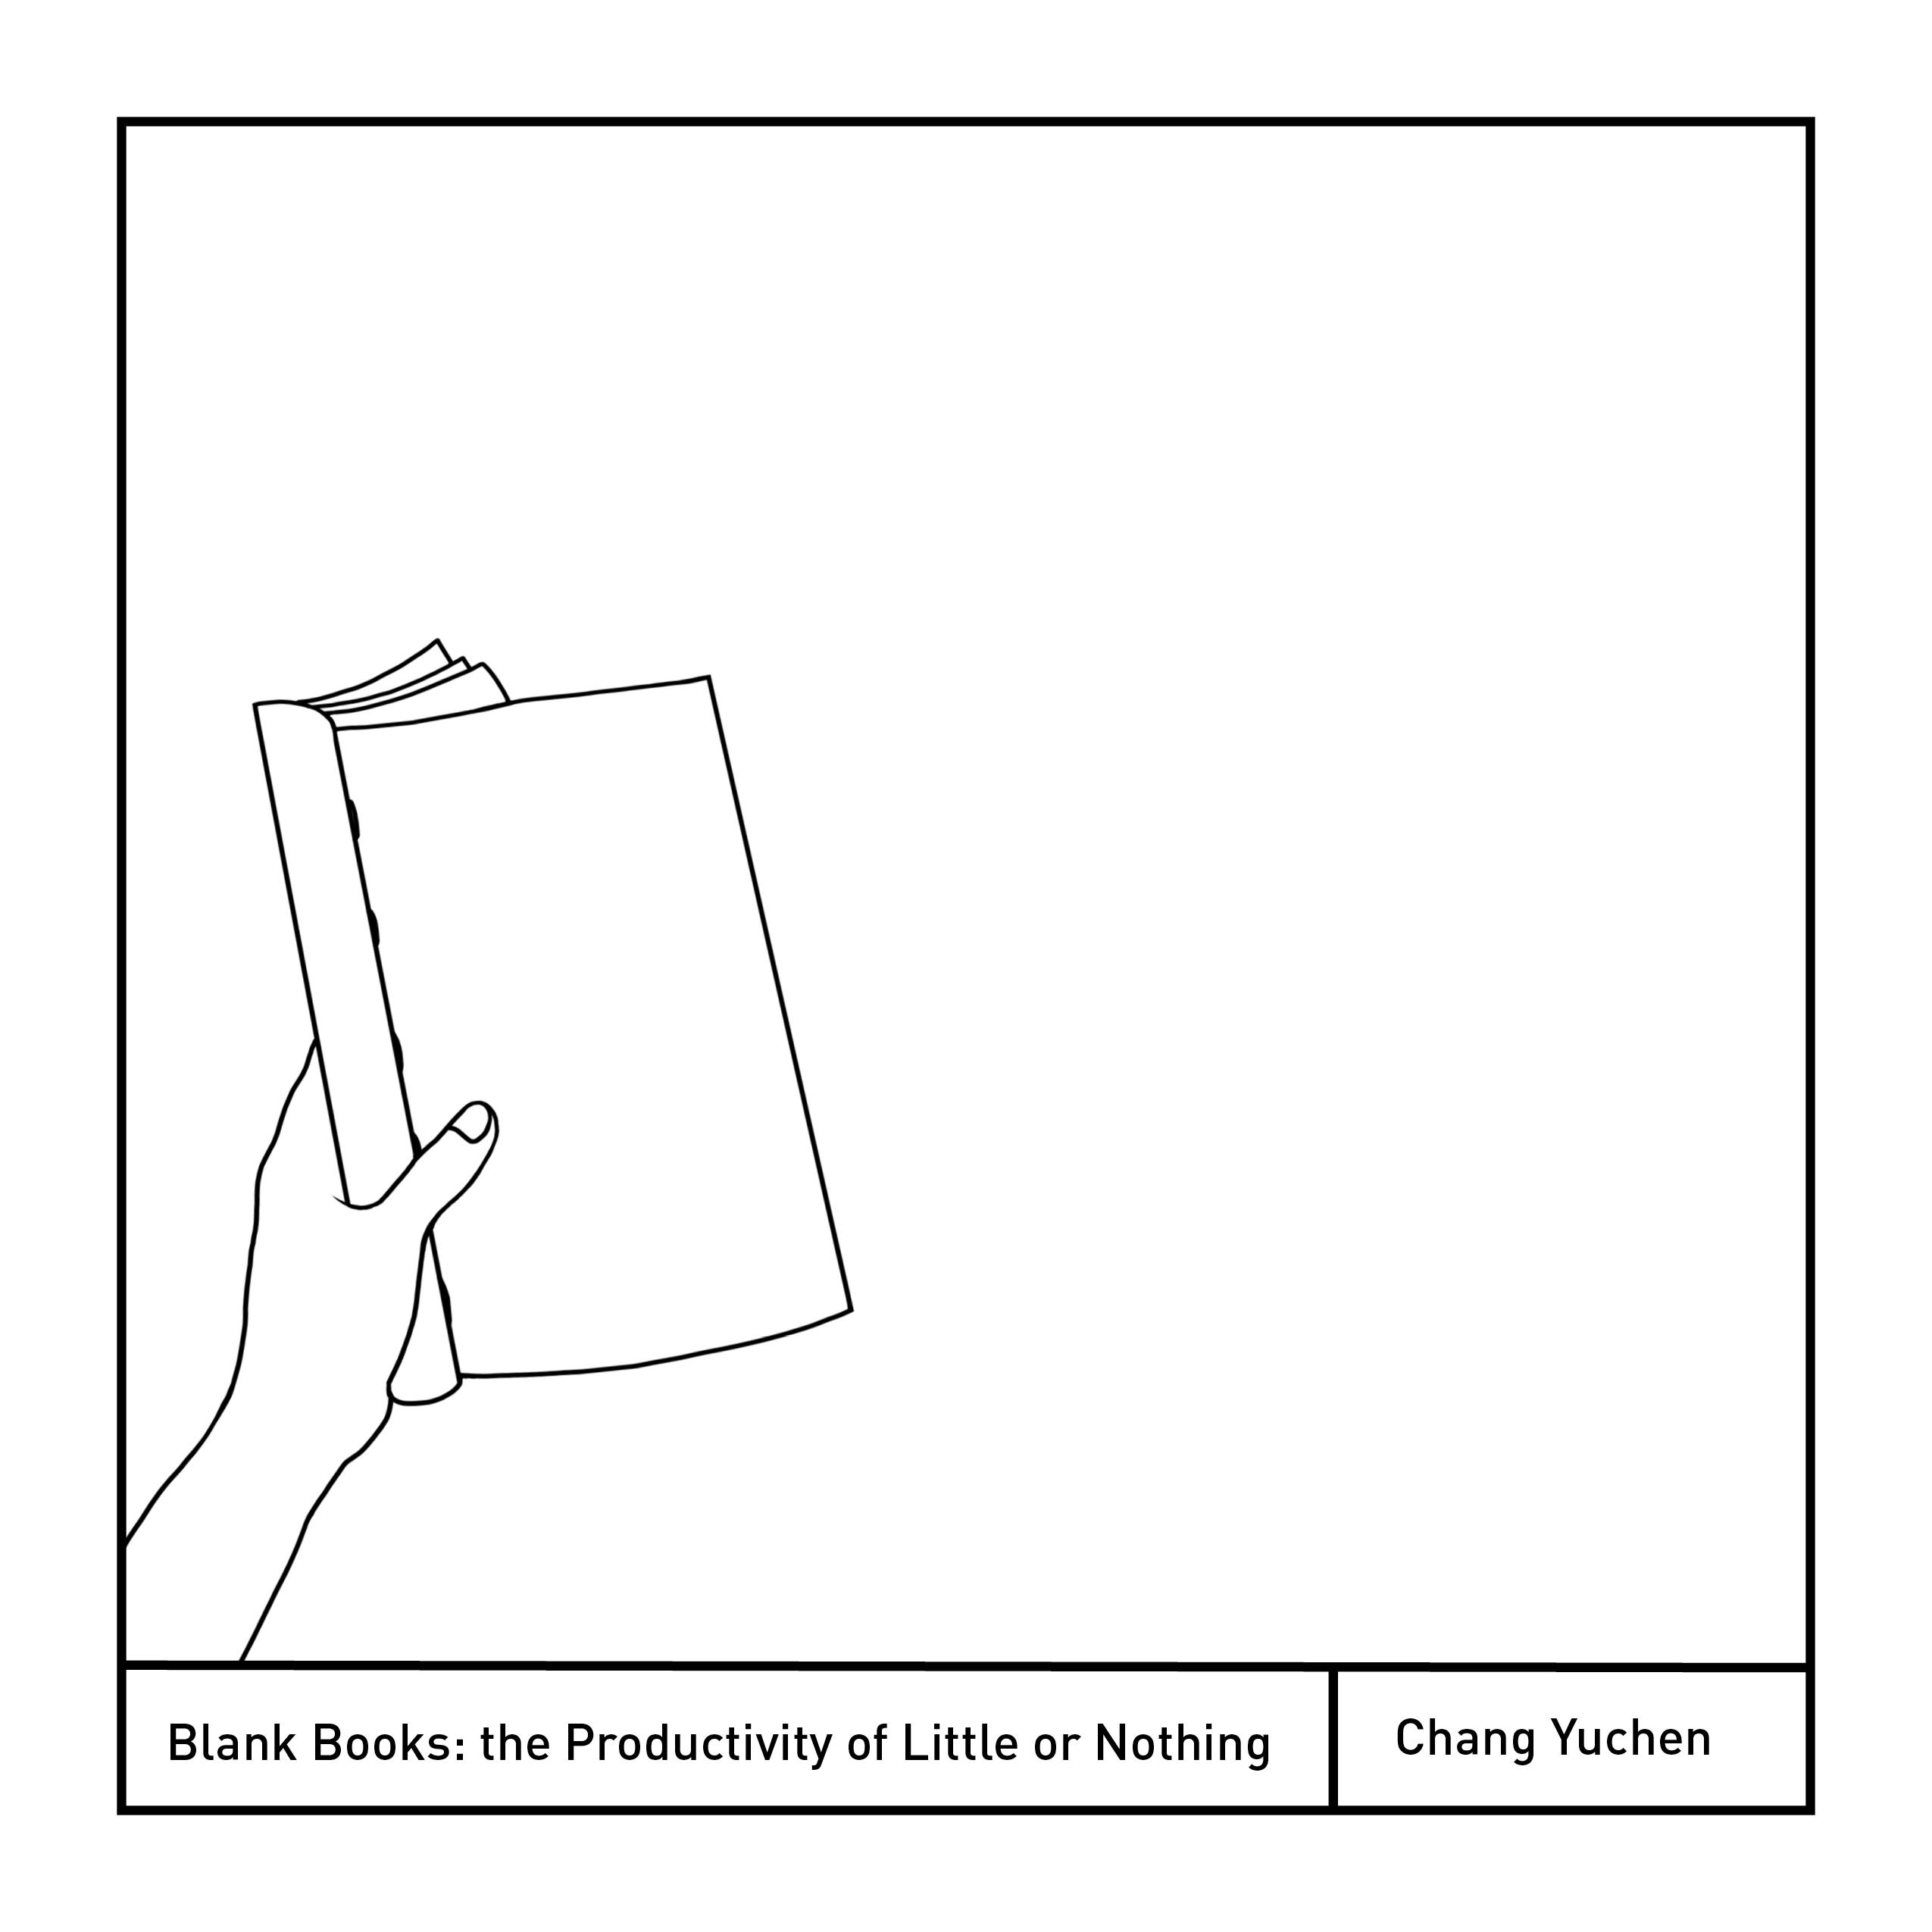 Blank Books: the Productivity of Little or Nothing - Center for Book Arts